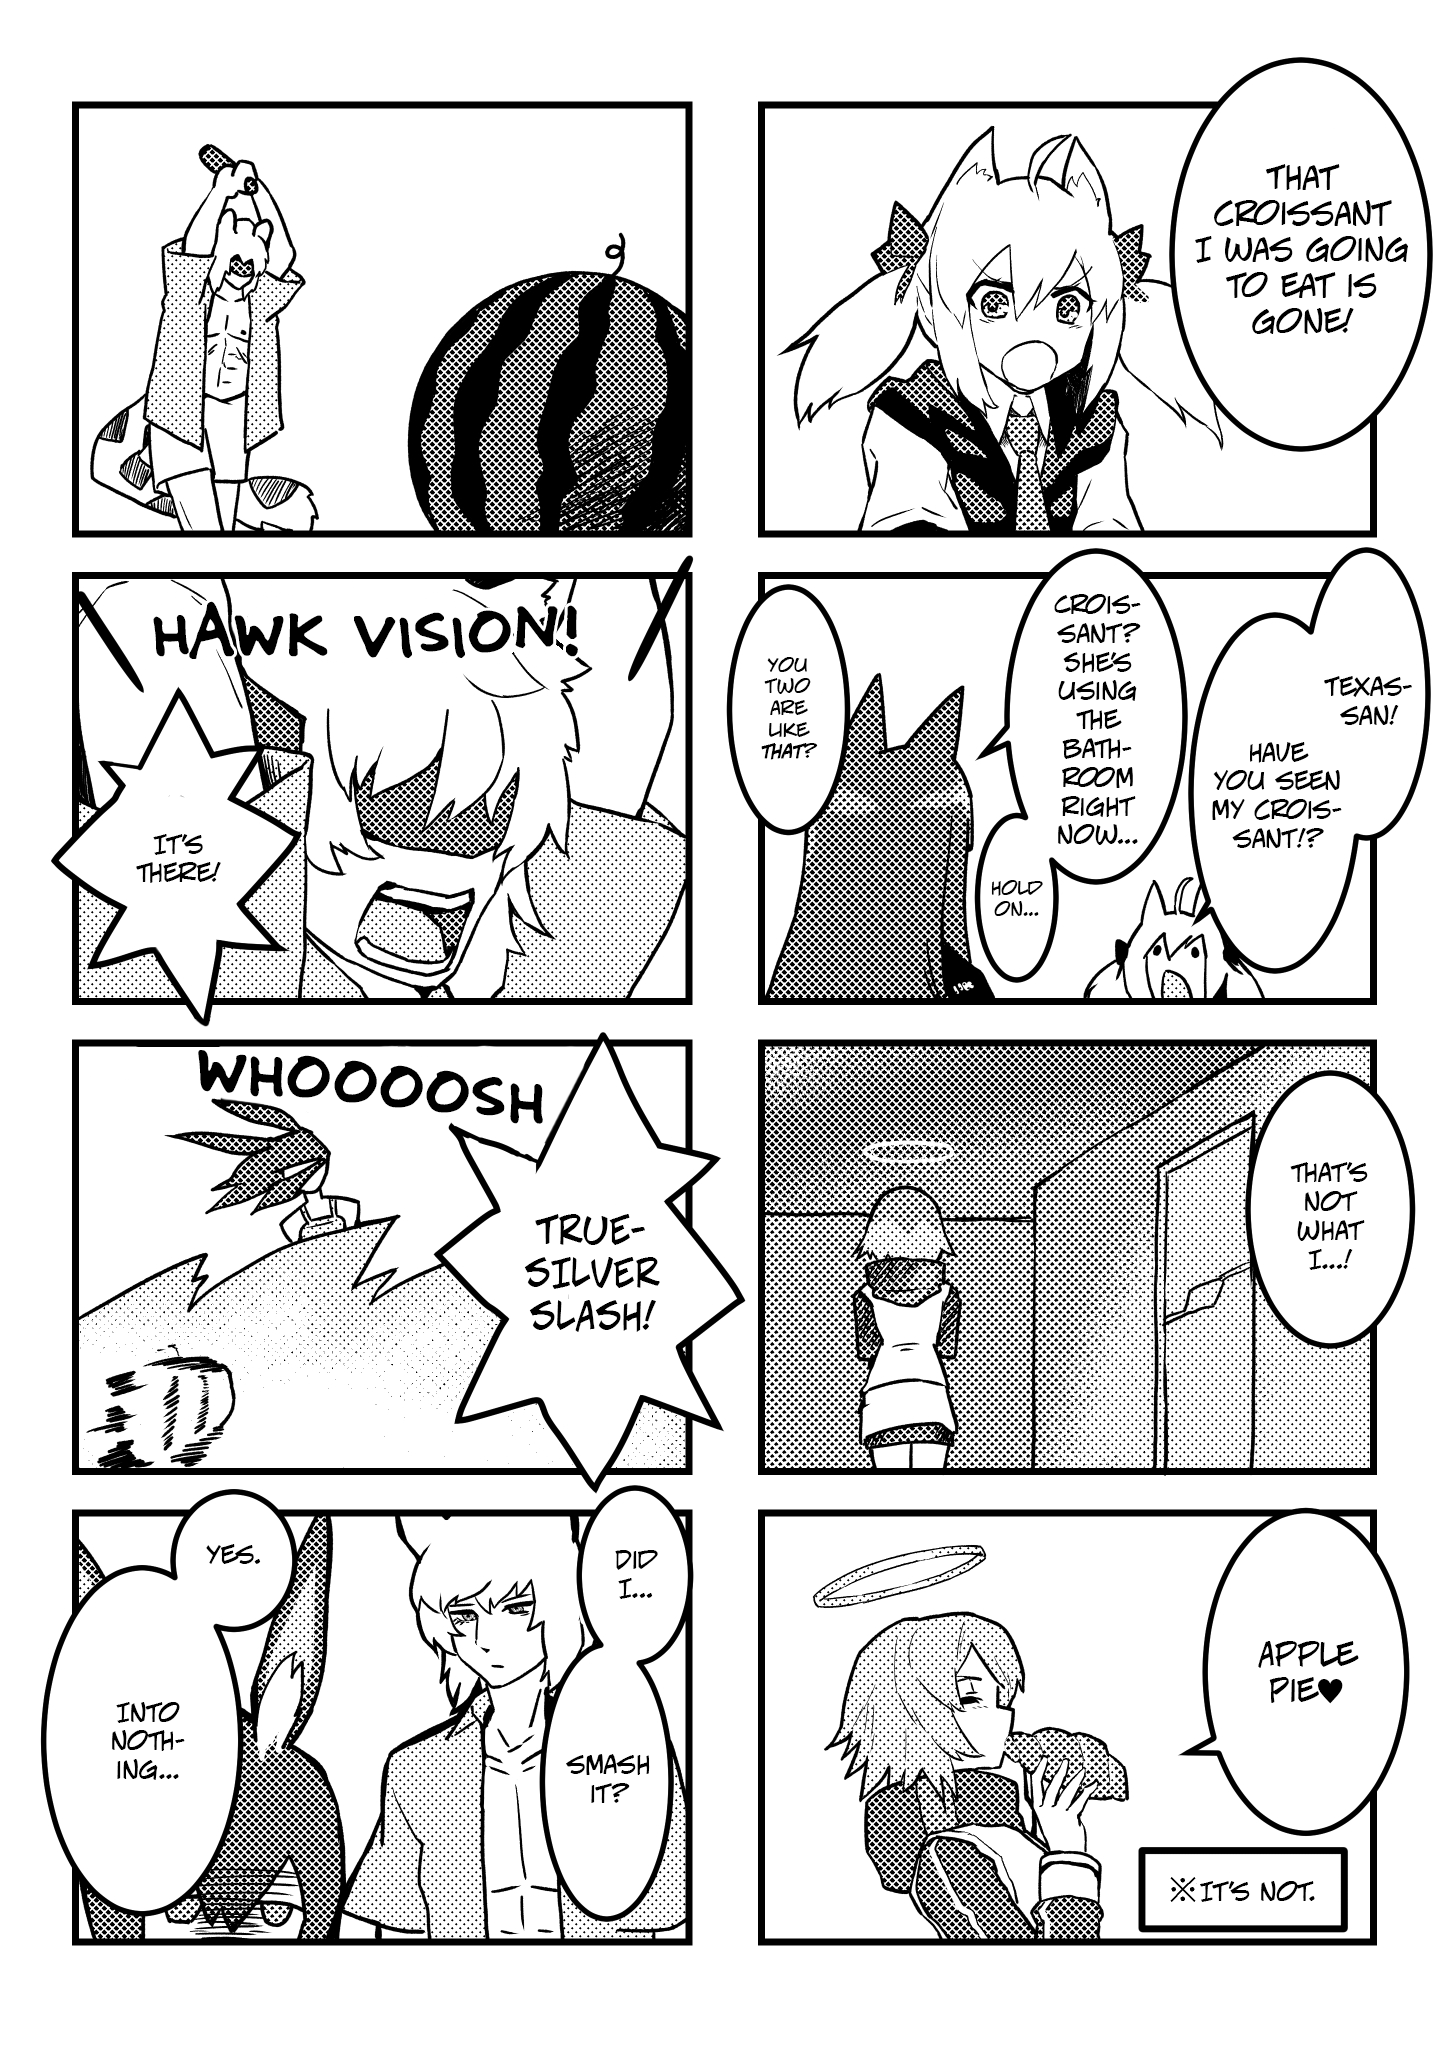 Whimsical Arknights 4Koma Theater Chapter 2 #1